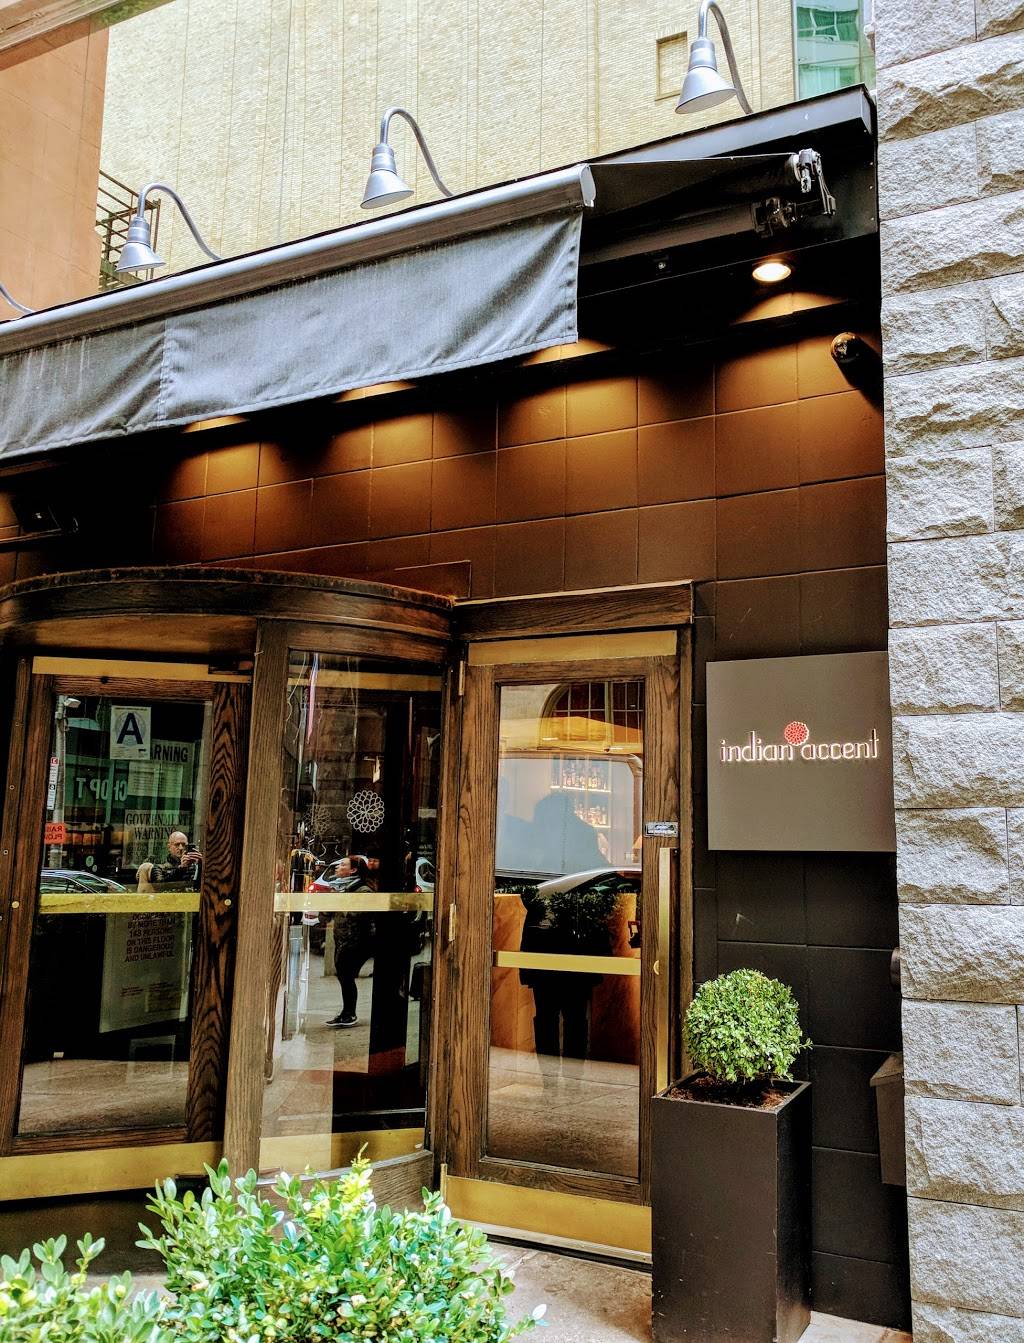 Indian Accent | restaurant | 123 W 56th St, New York, NY 10019, USA | 2128428070 OR +1 212-842-8070